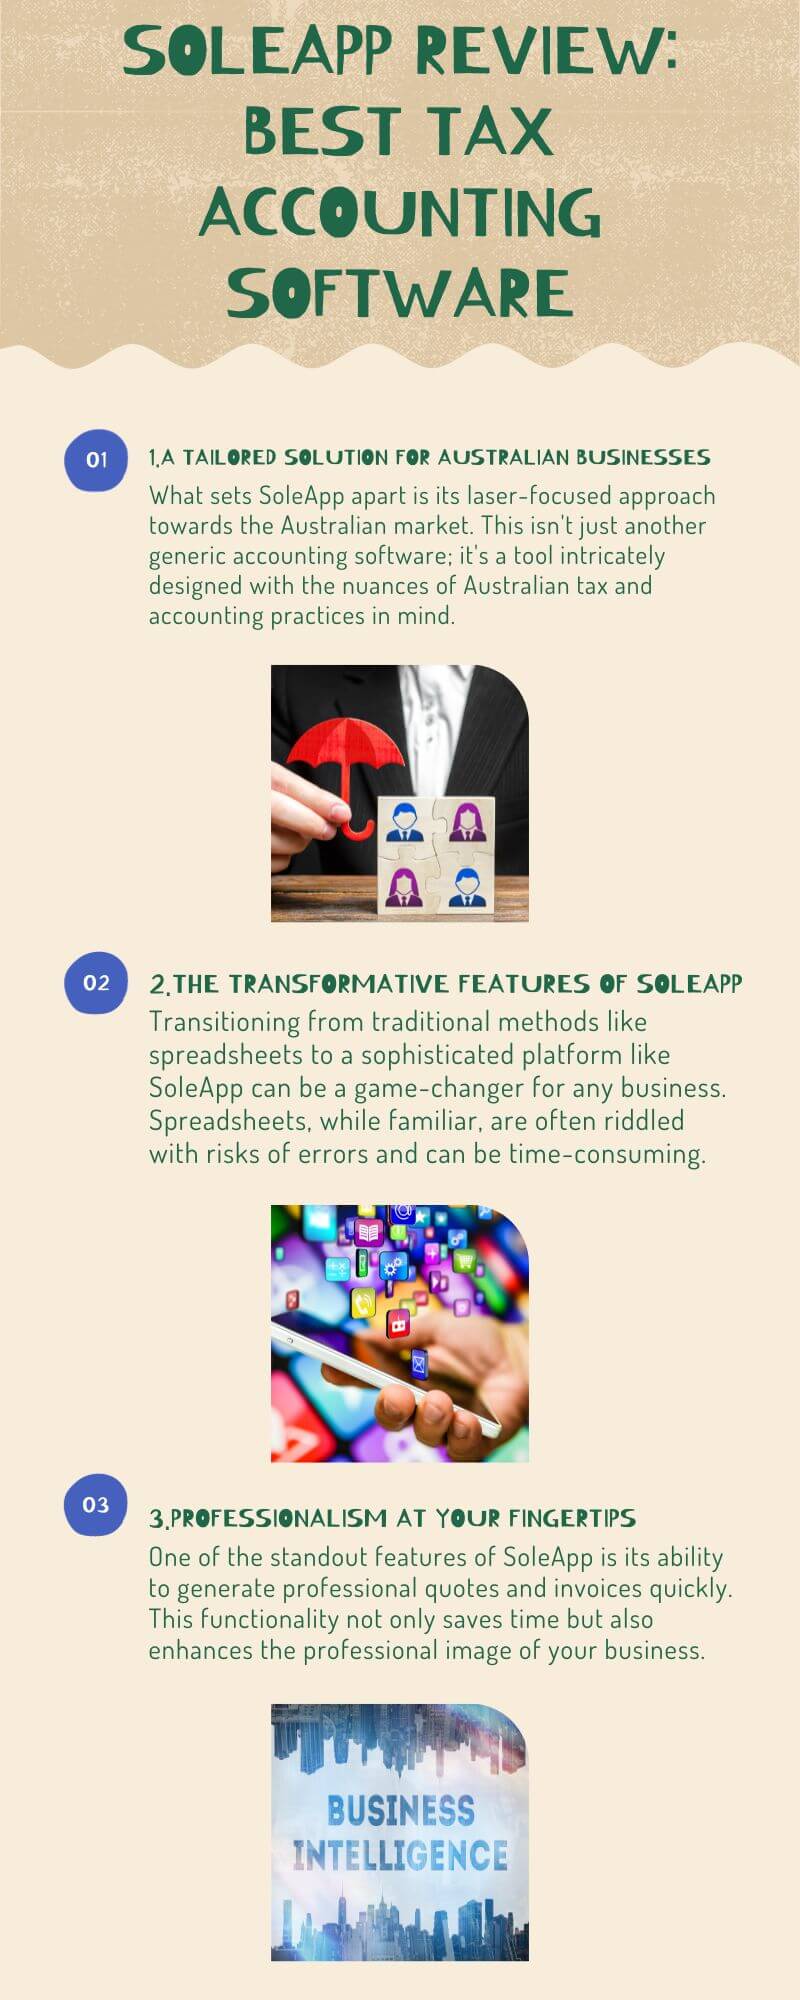 Soleapp Review: Best Tax Accounting Software